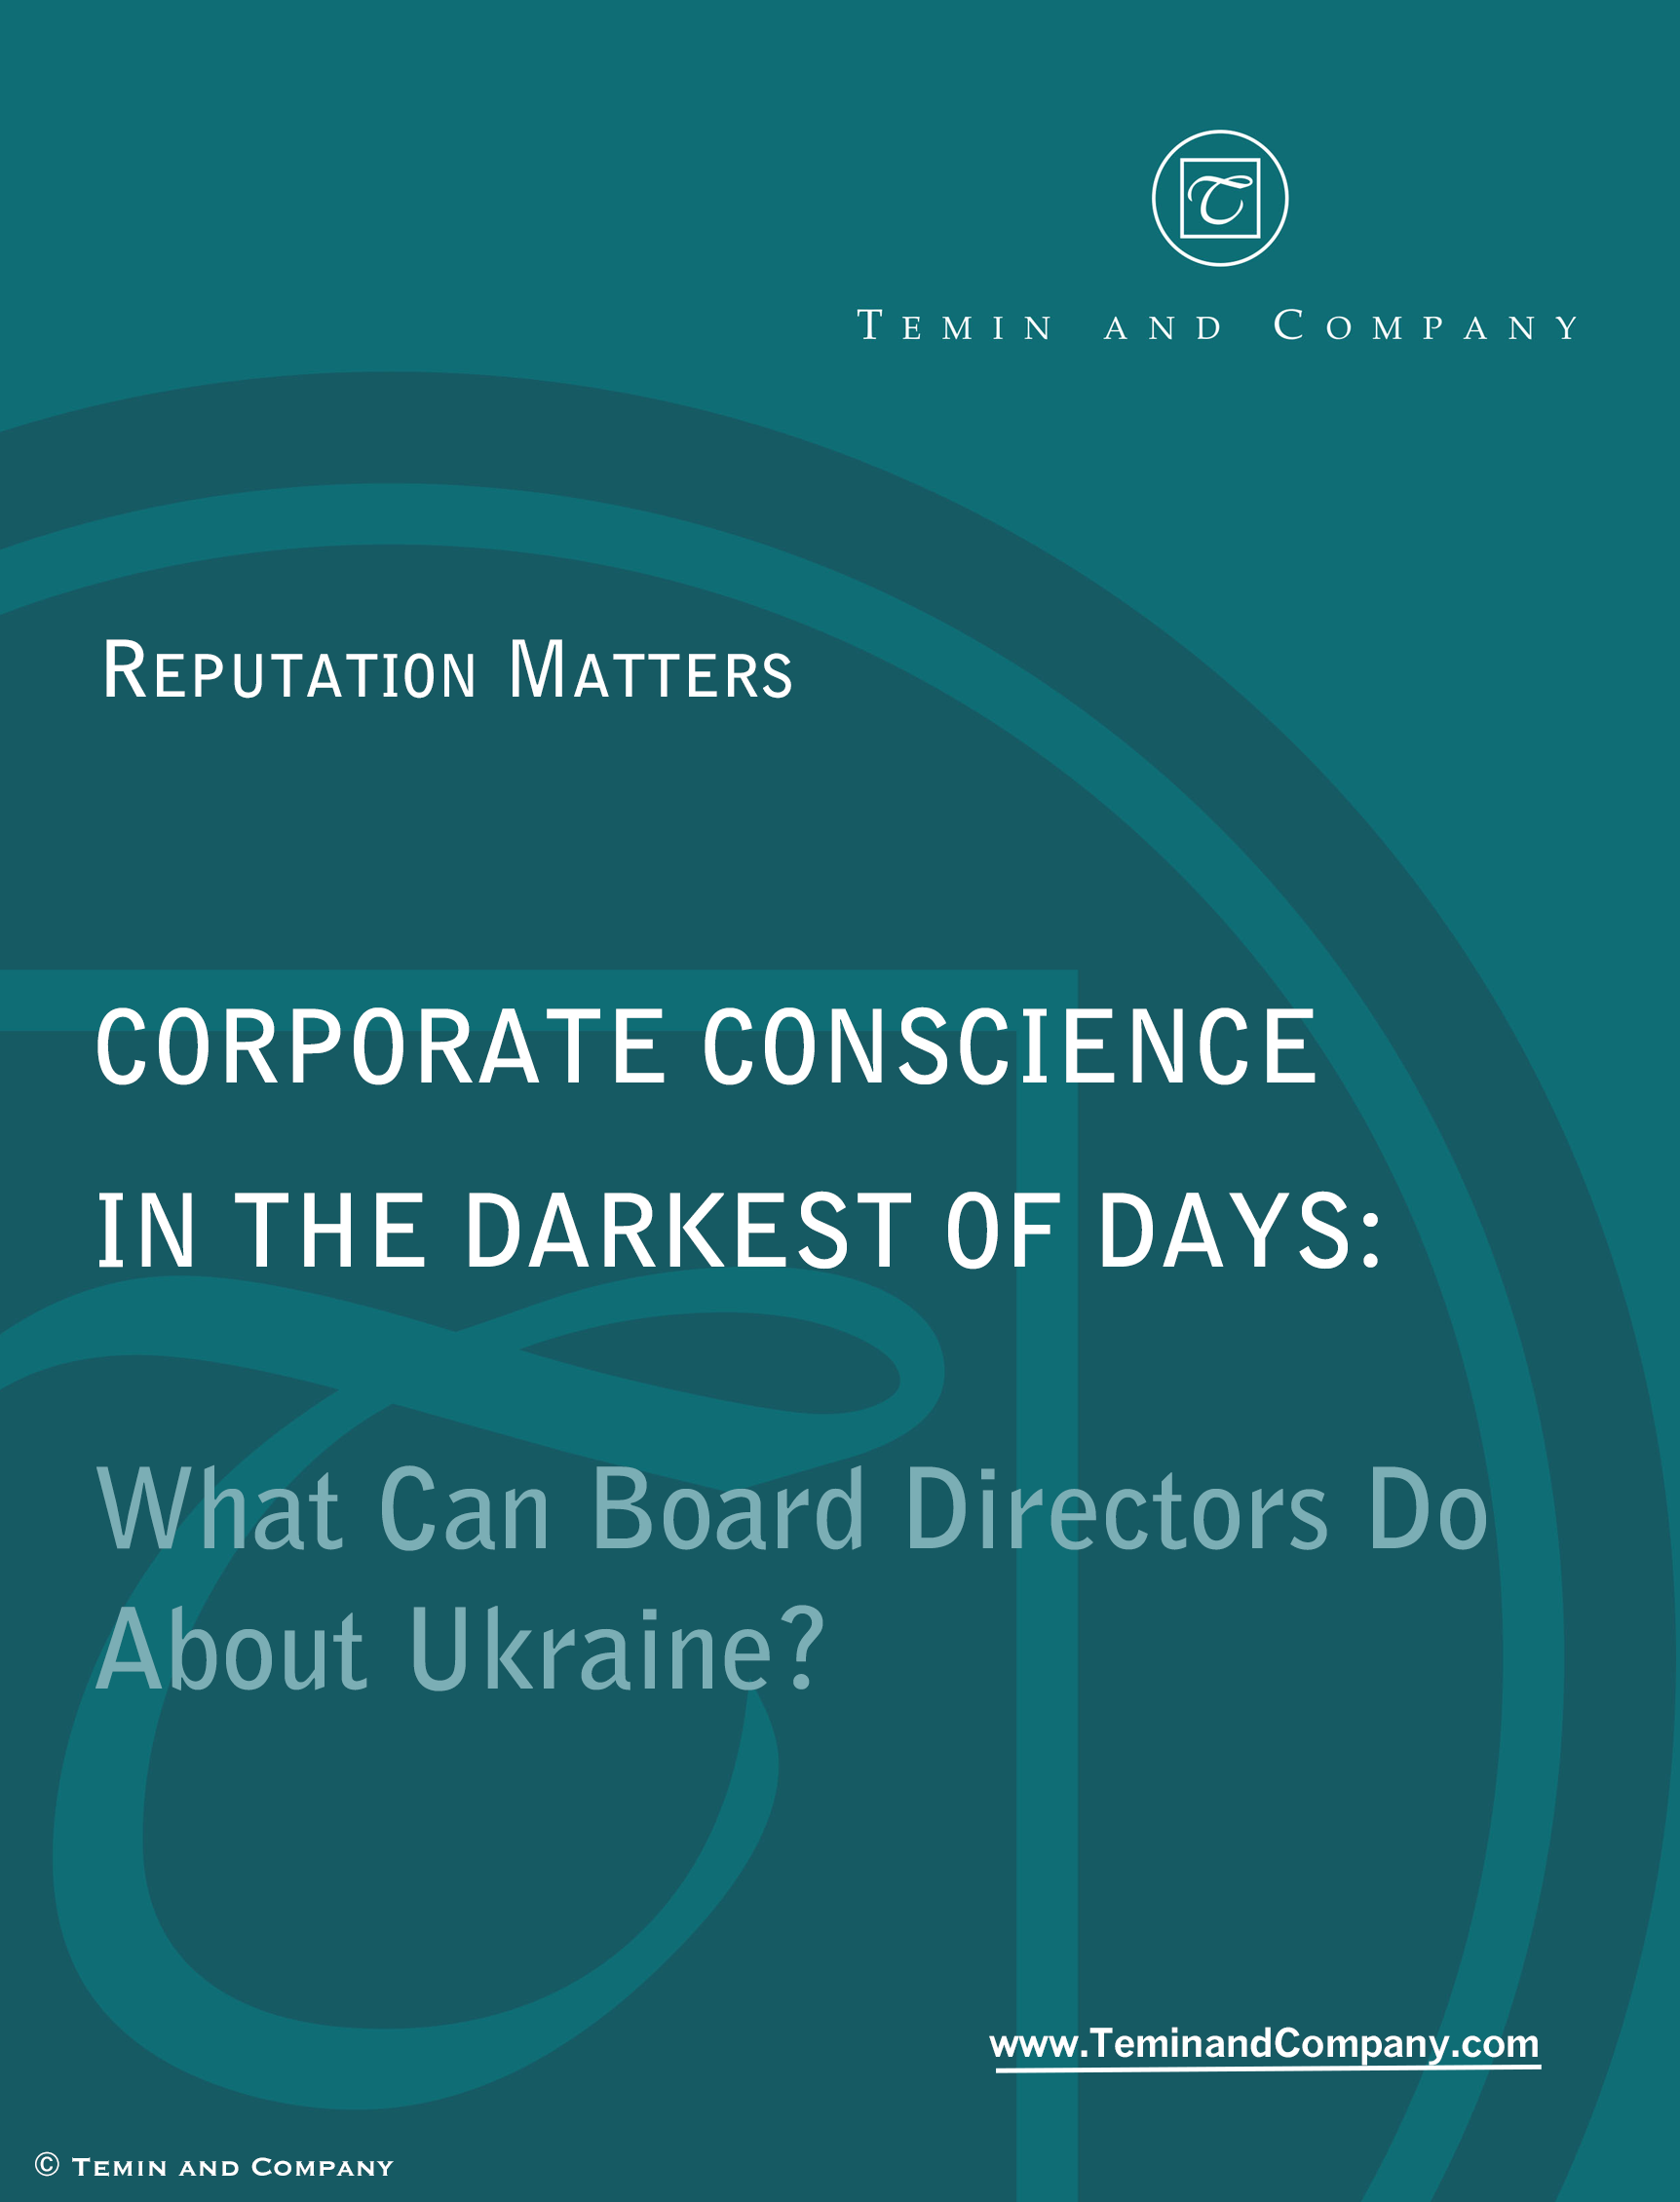 Corporate Conscience In The Darkest Of Days: What Can Board Directors Do About Ukraine?